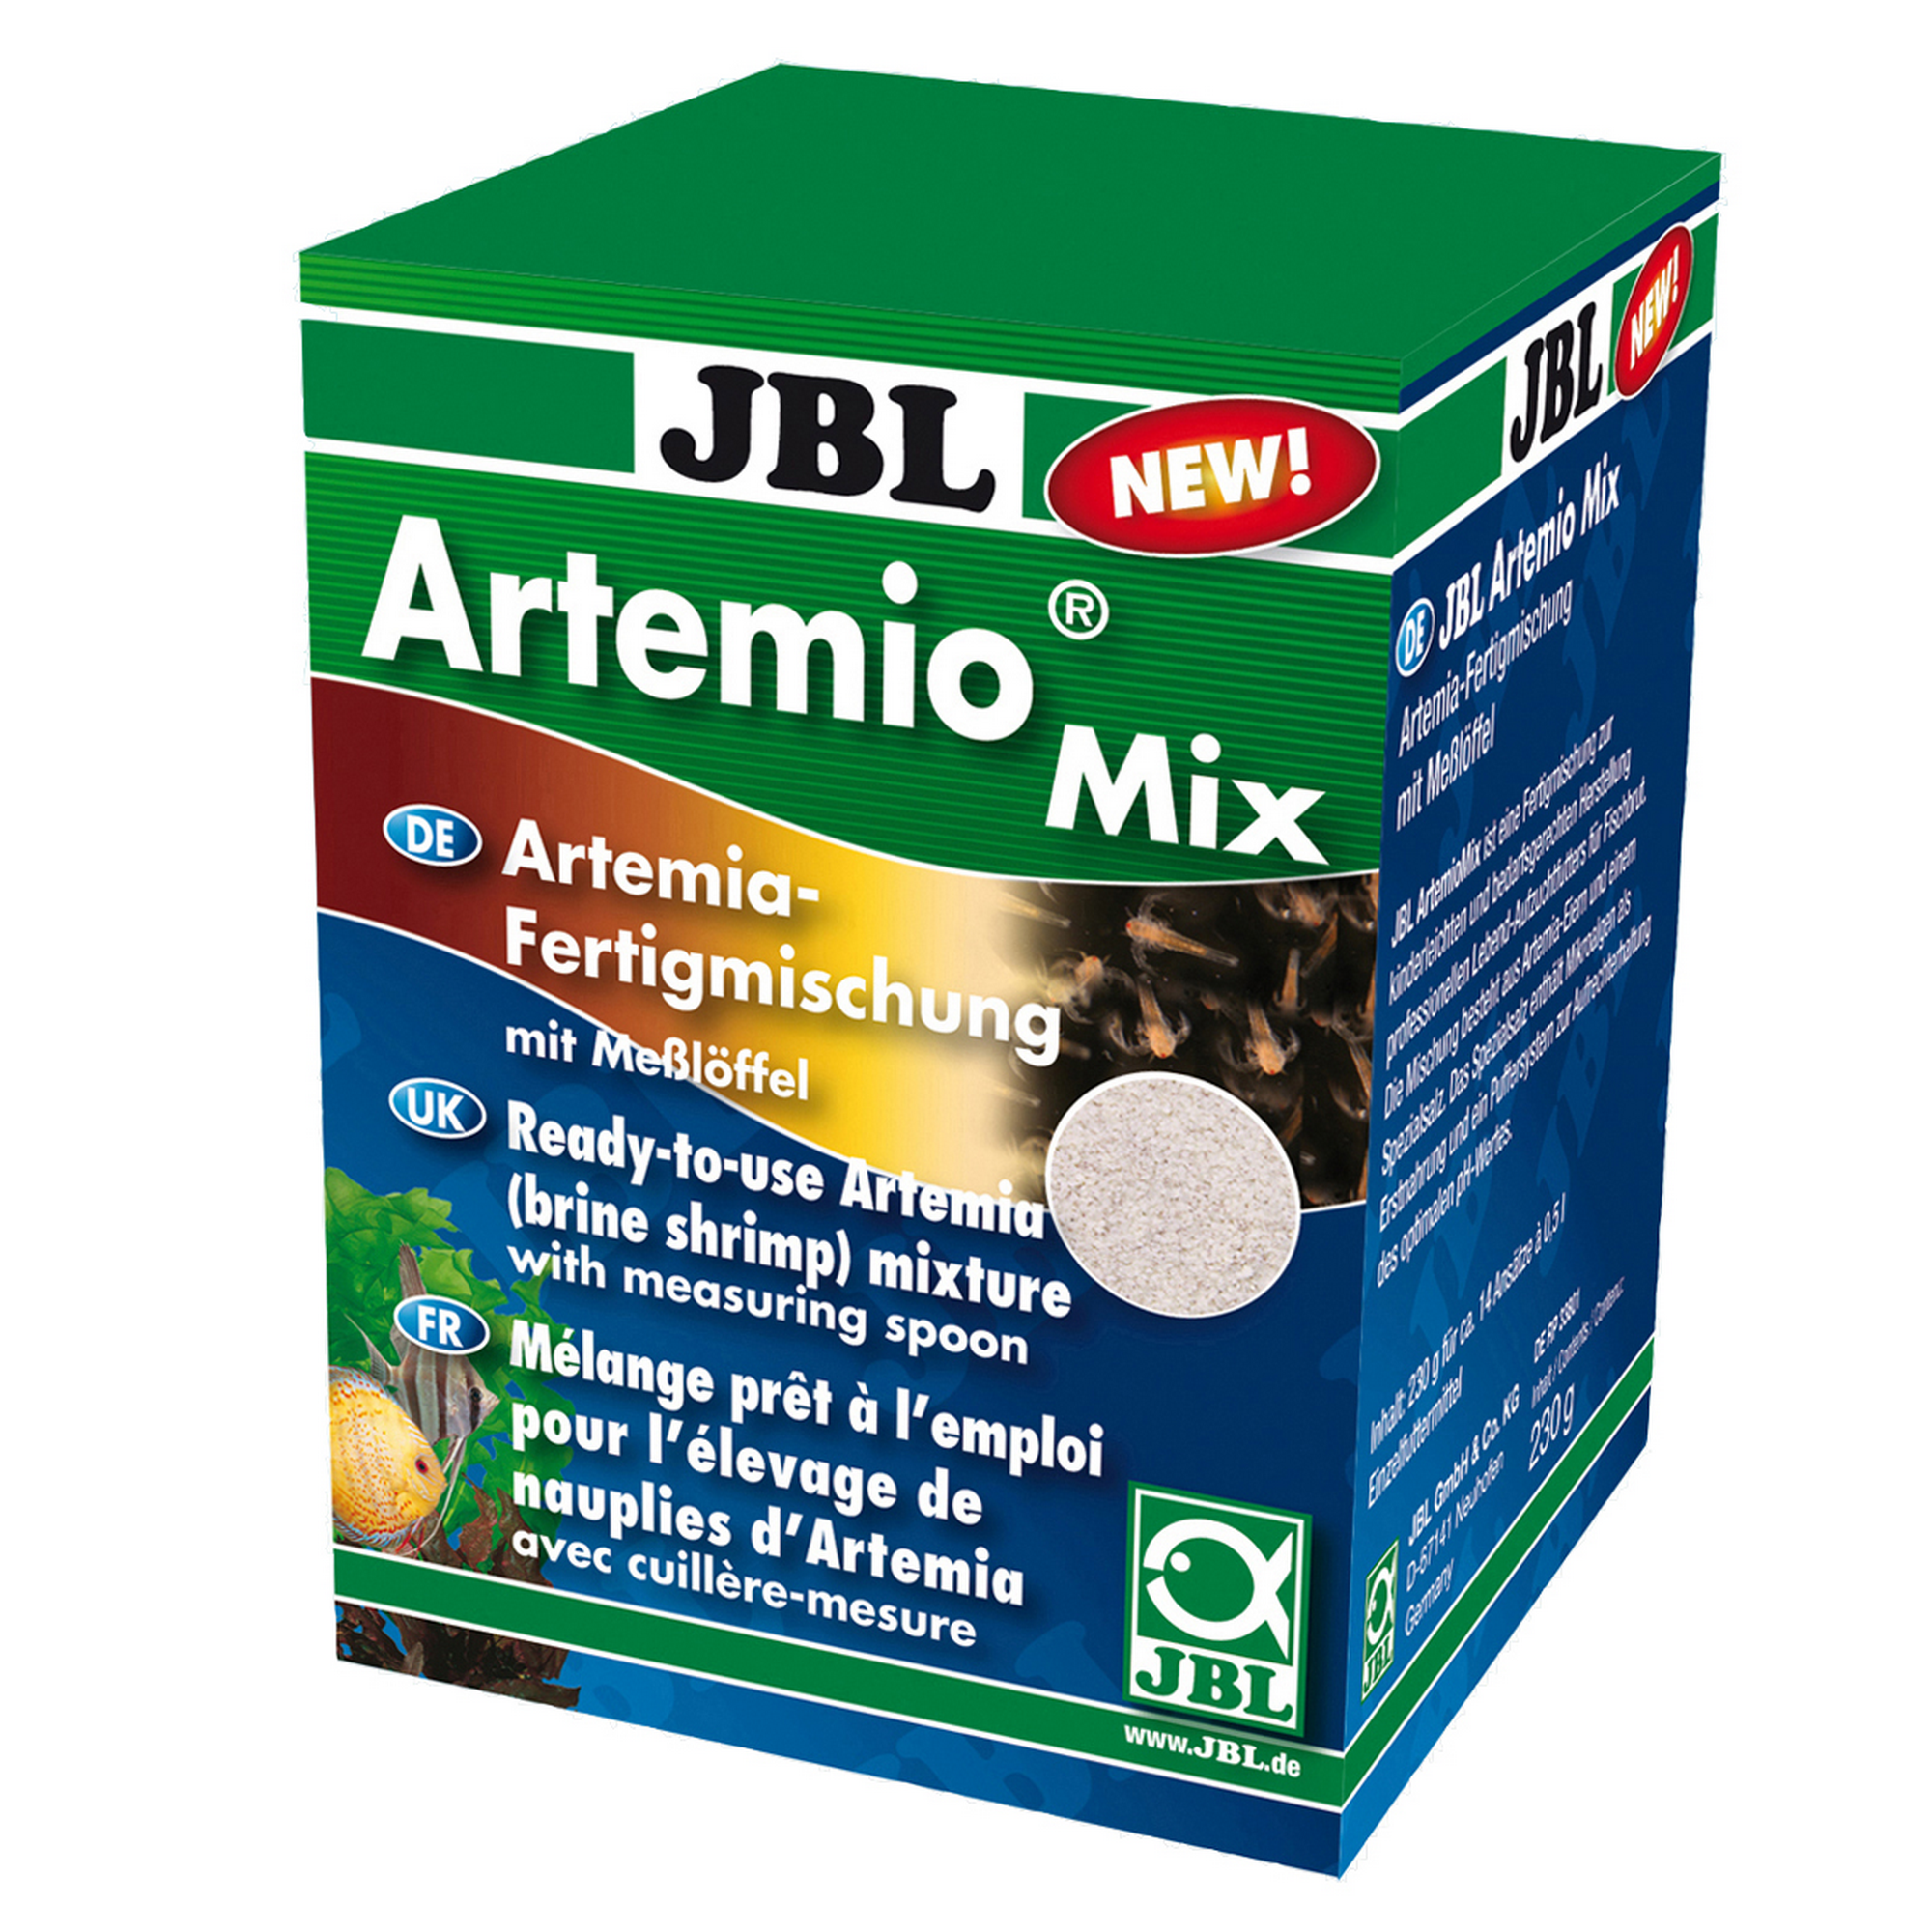 ArtemioMix + product picture